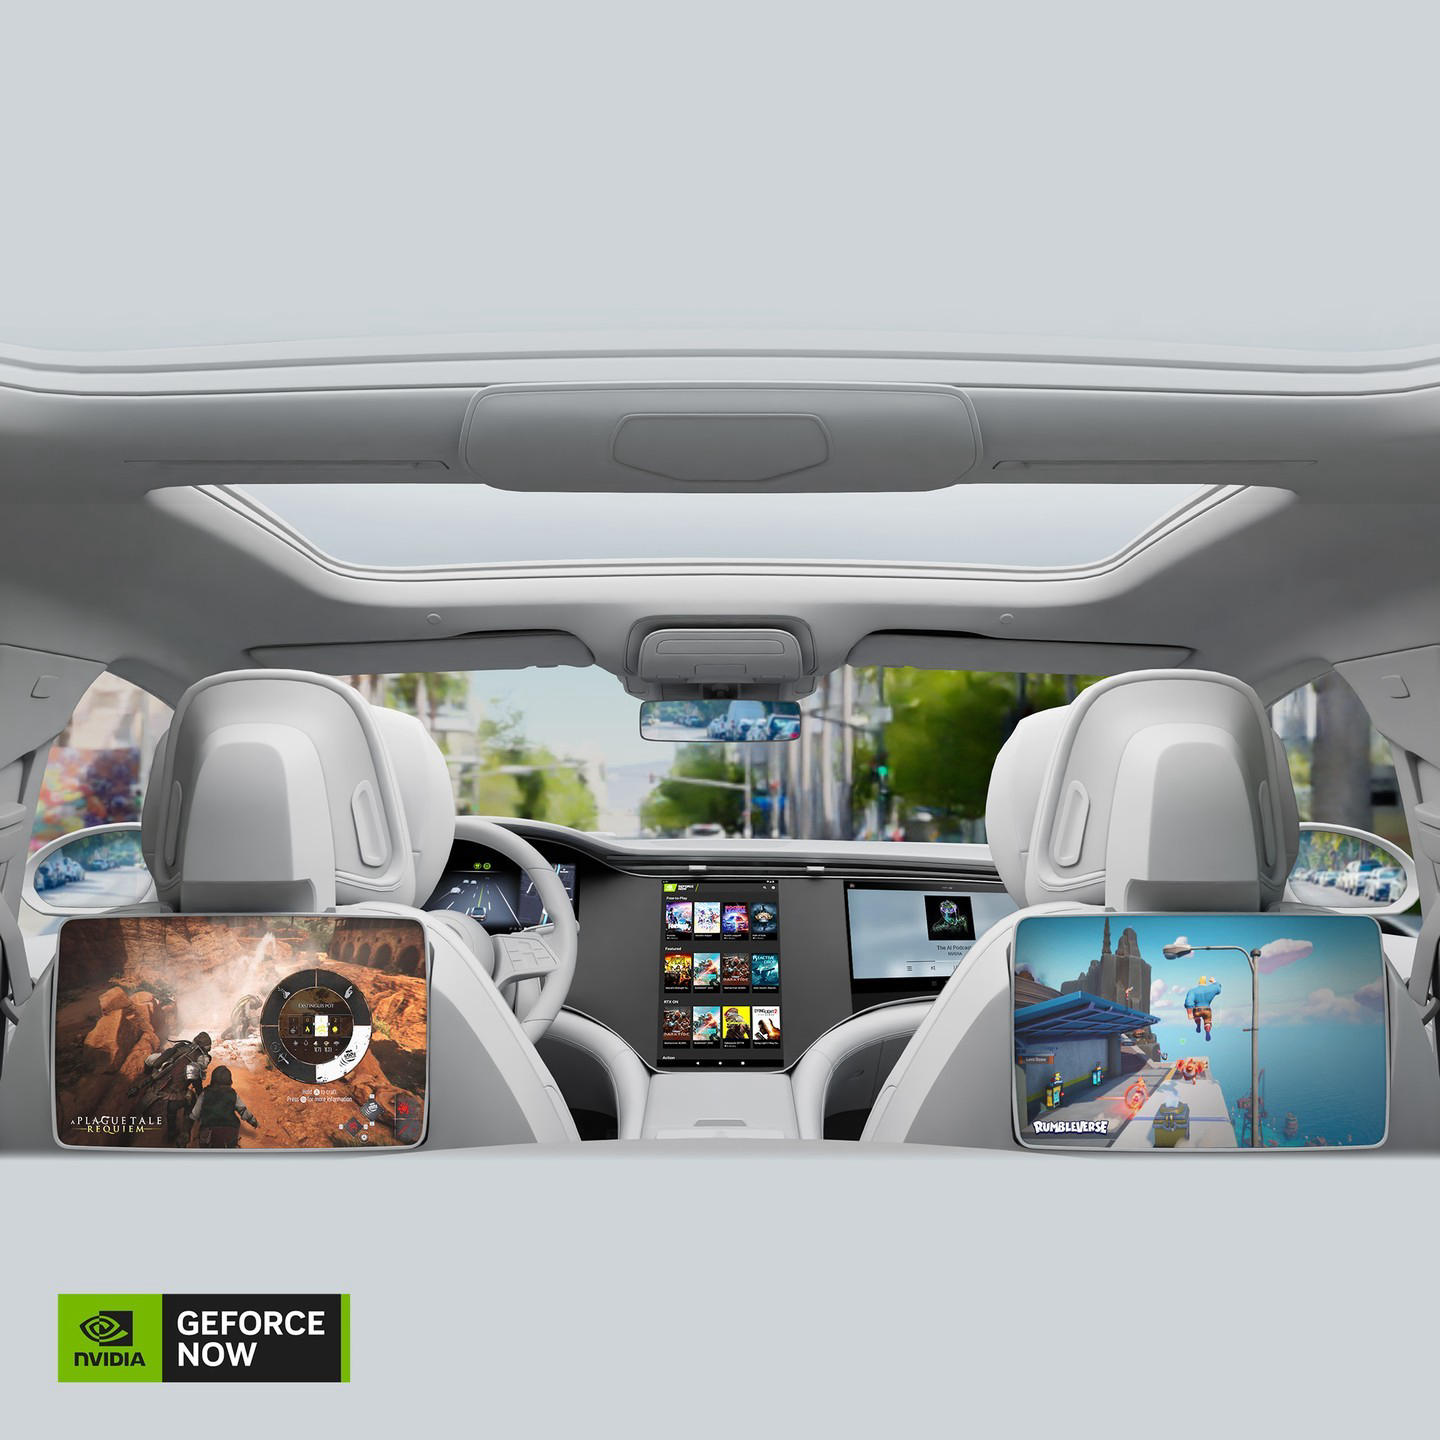 NVIDIA - Riding in a car has never been more entertaining